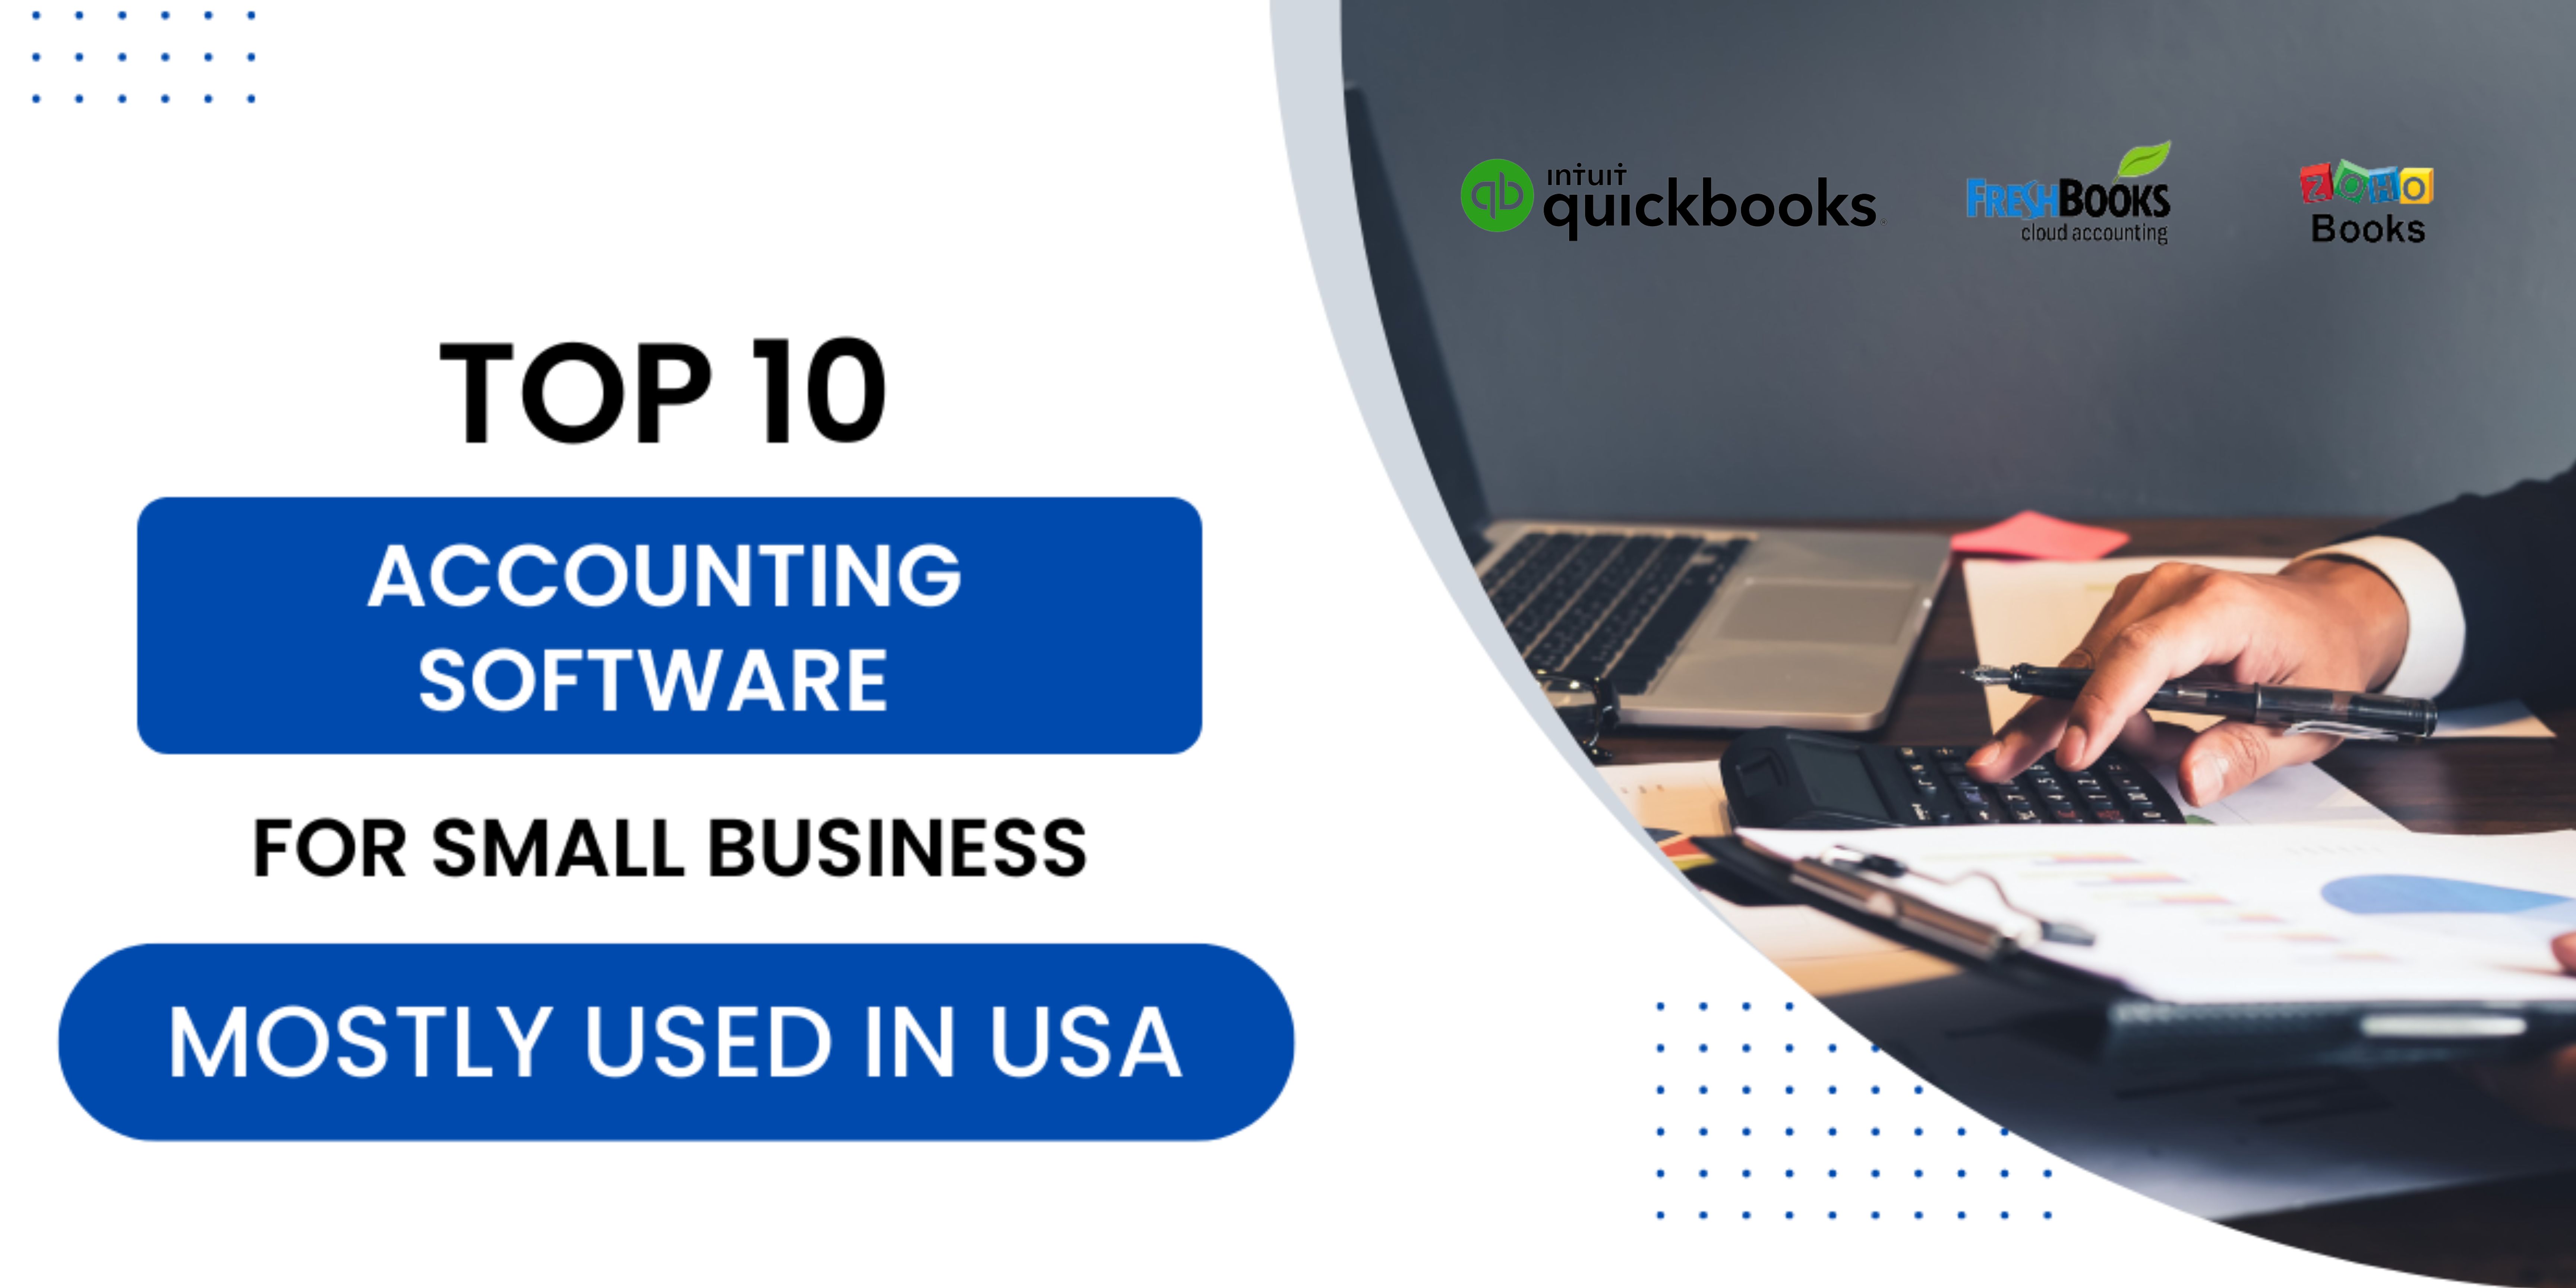 Top 10 Accounting Software for Small Business Mostly Used in USA